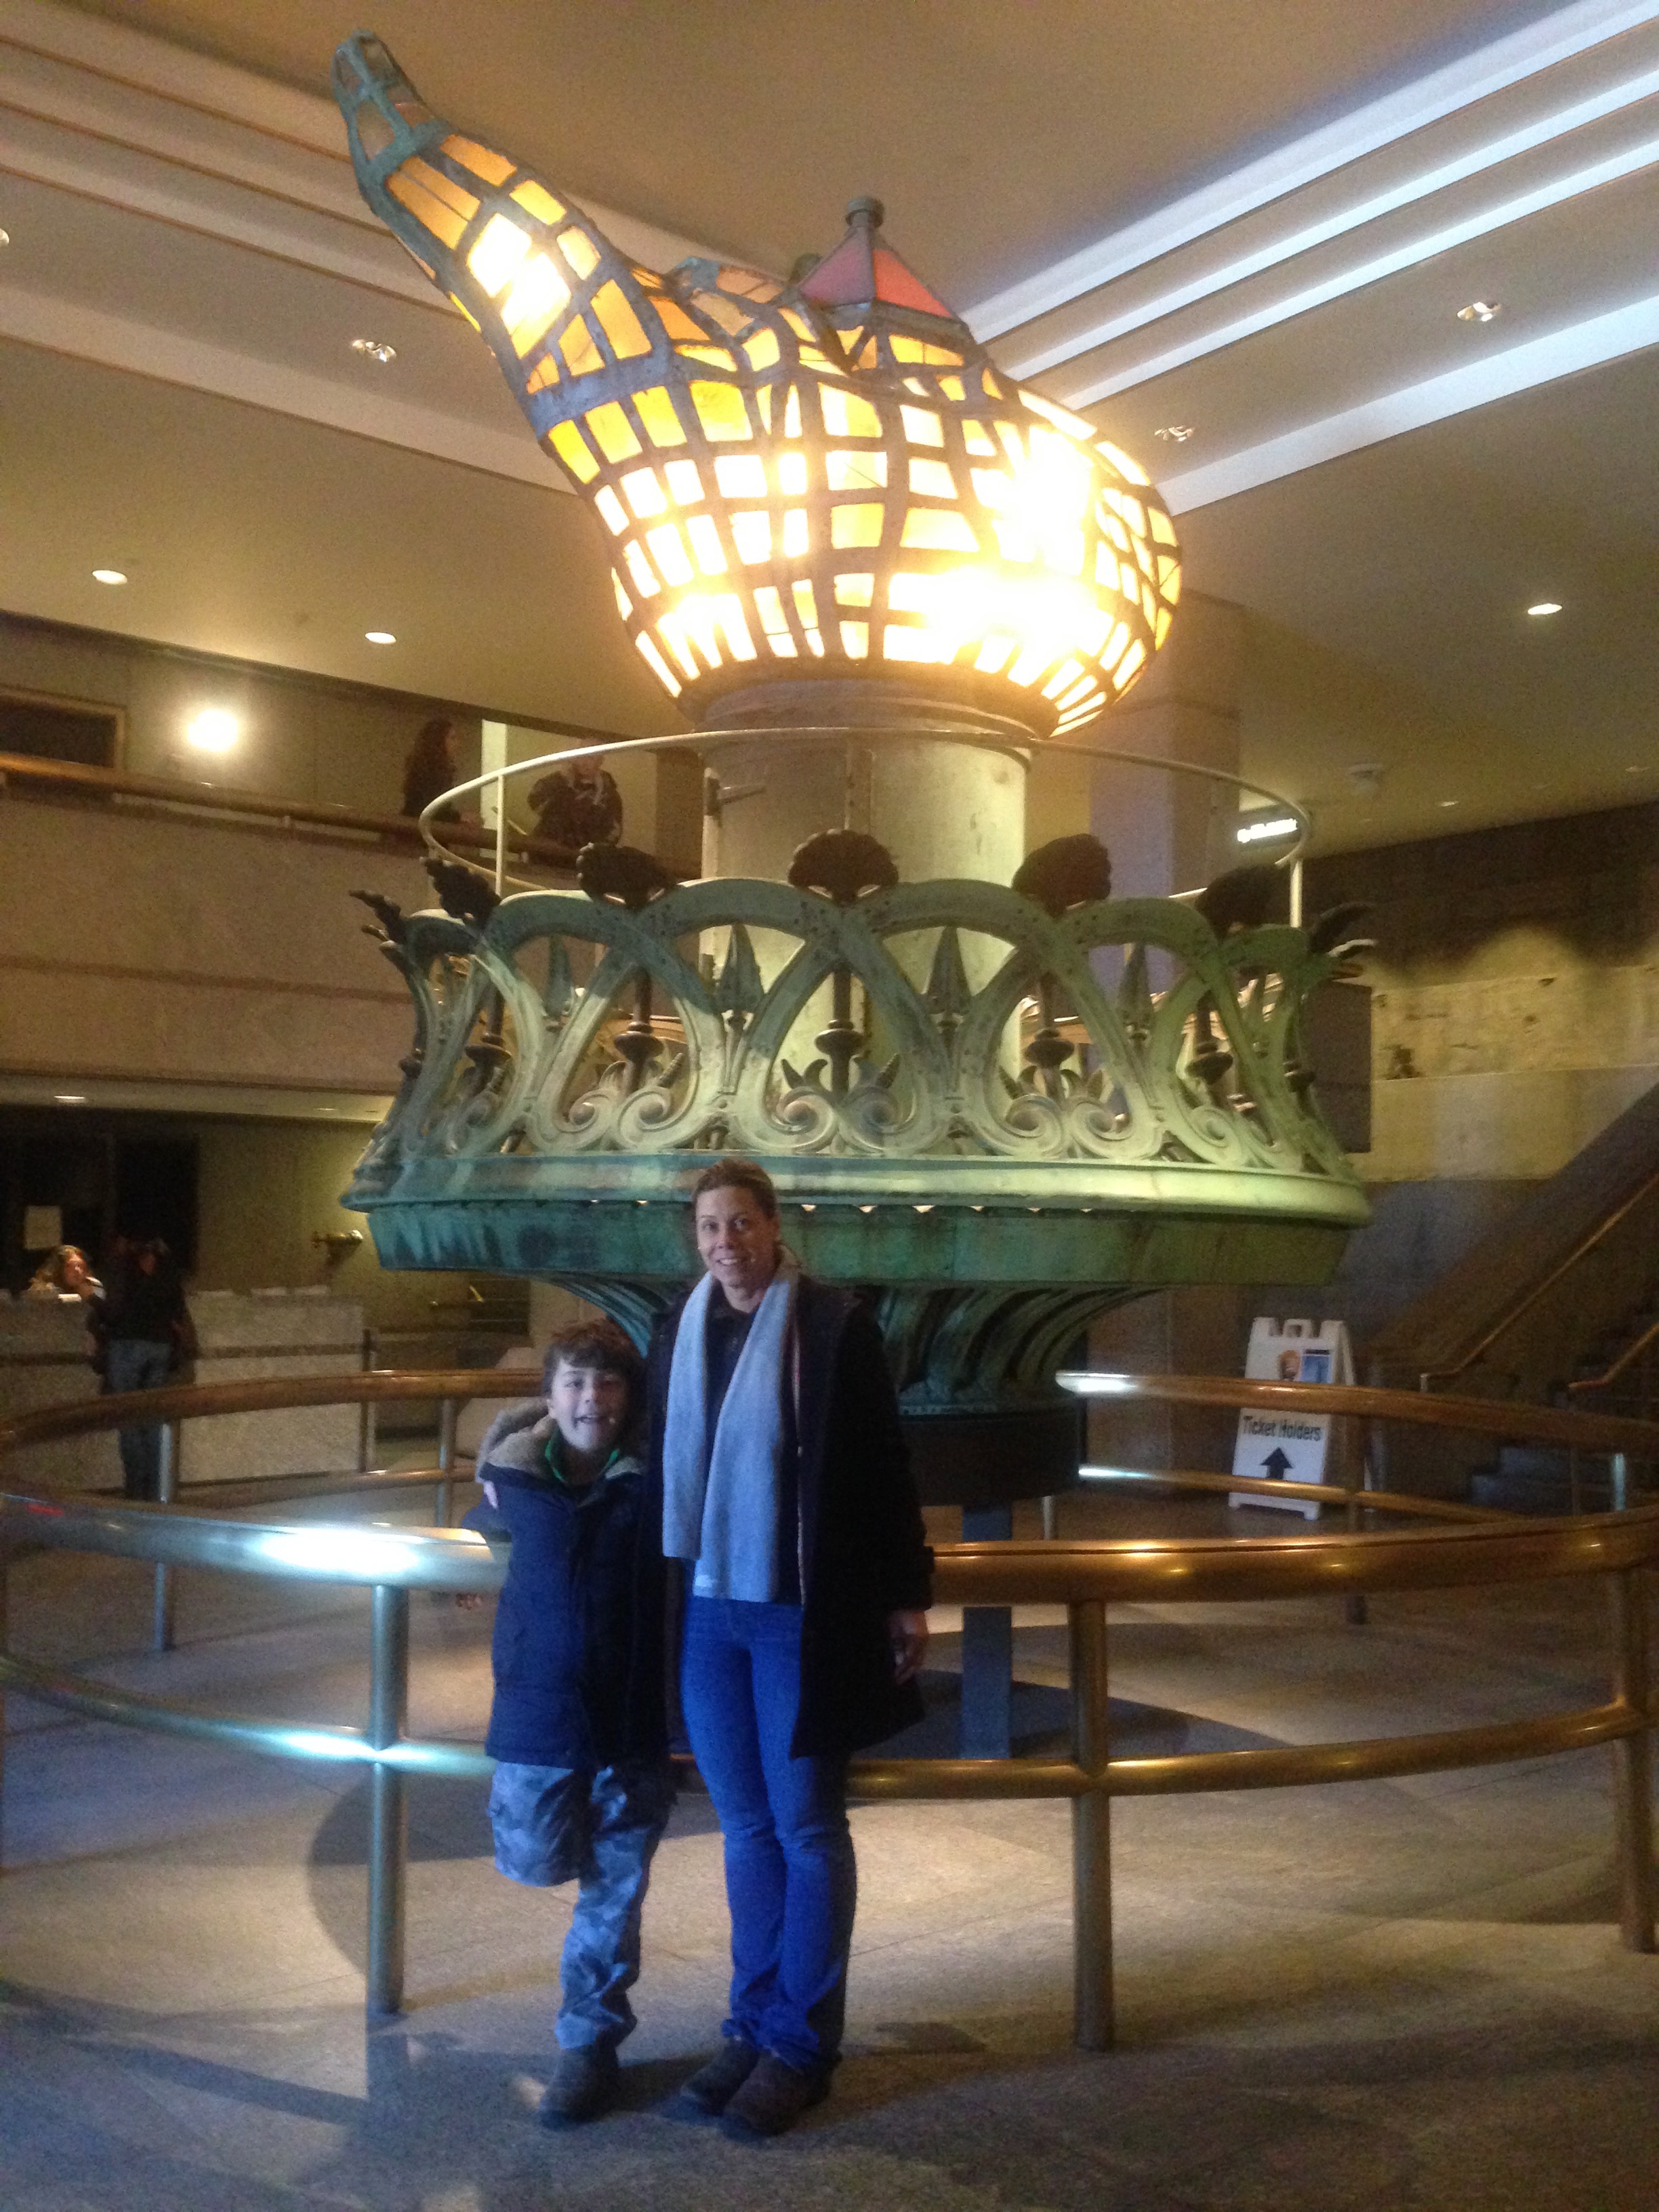 Inside the pedestal, mom and son with Statue of Liberty's flame